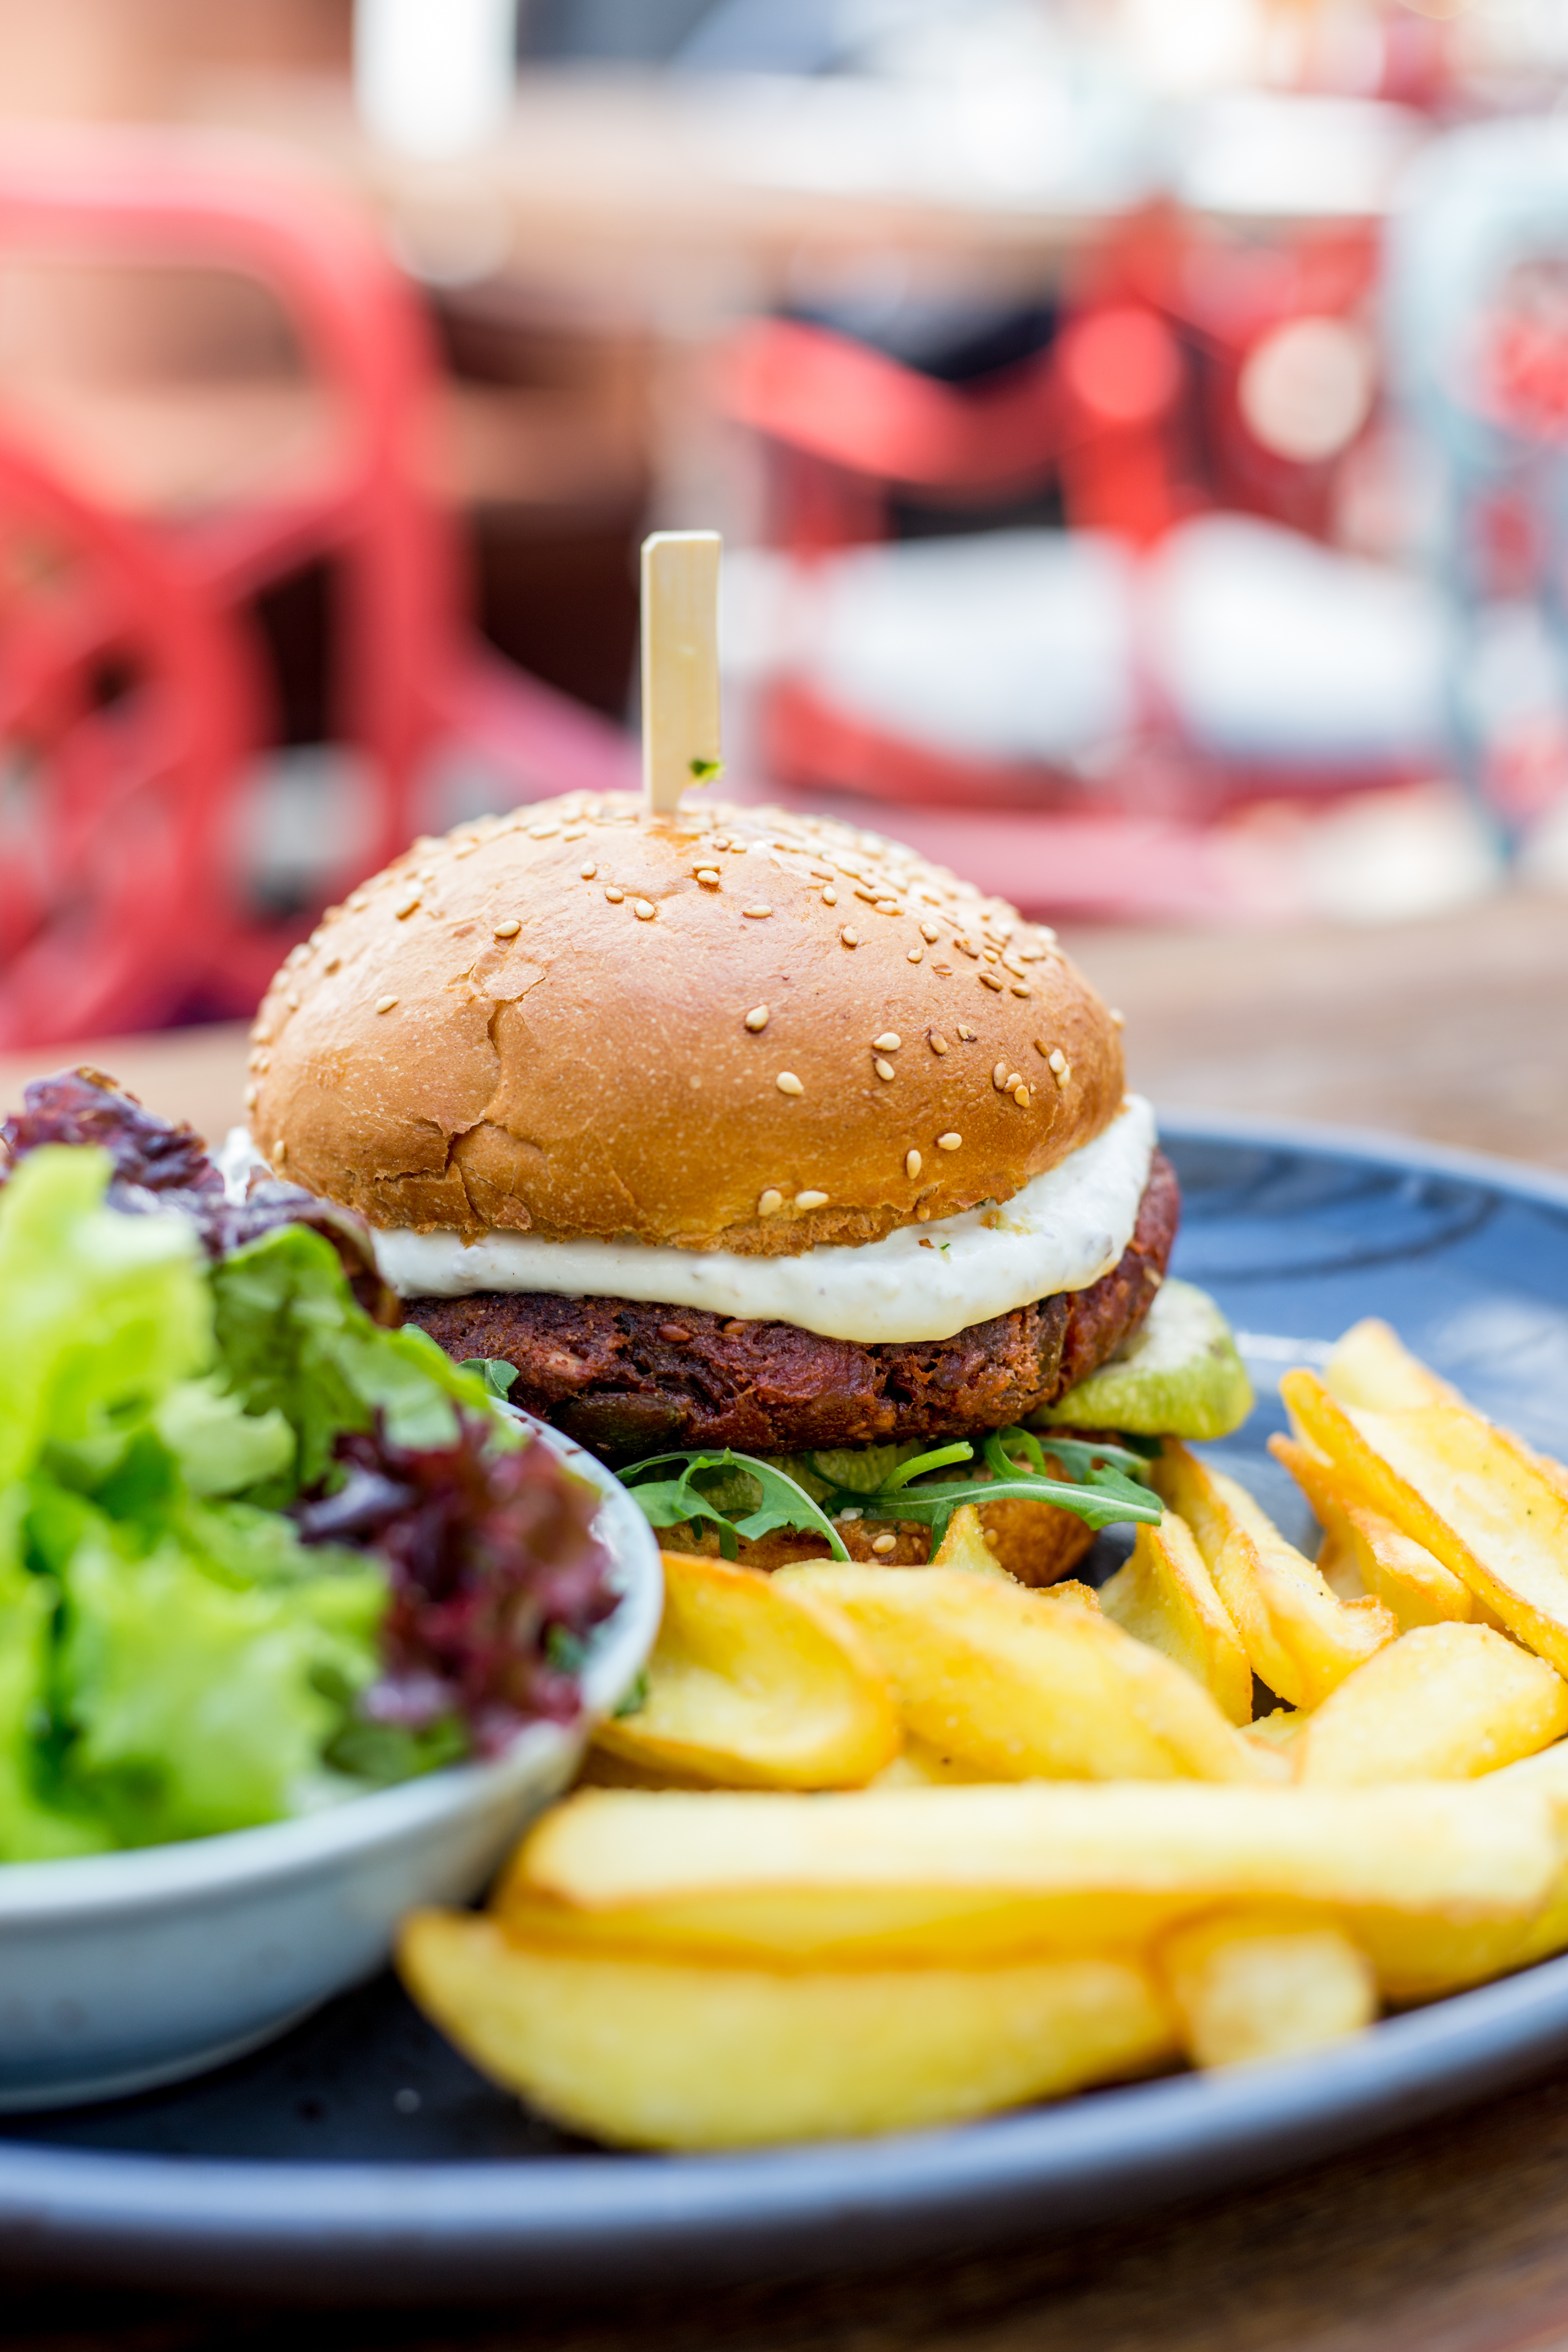 Are Condiments Healthy? What To Put On Your French Fries and Hamburger